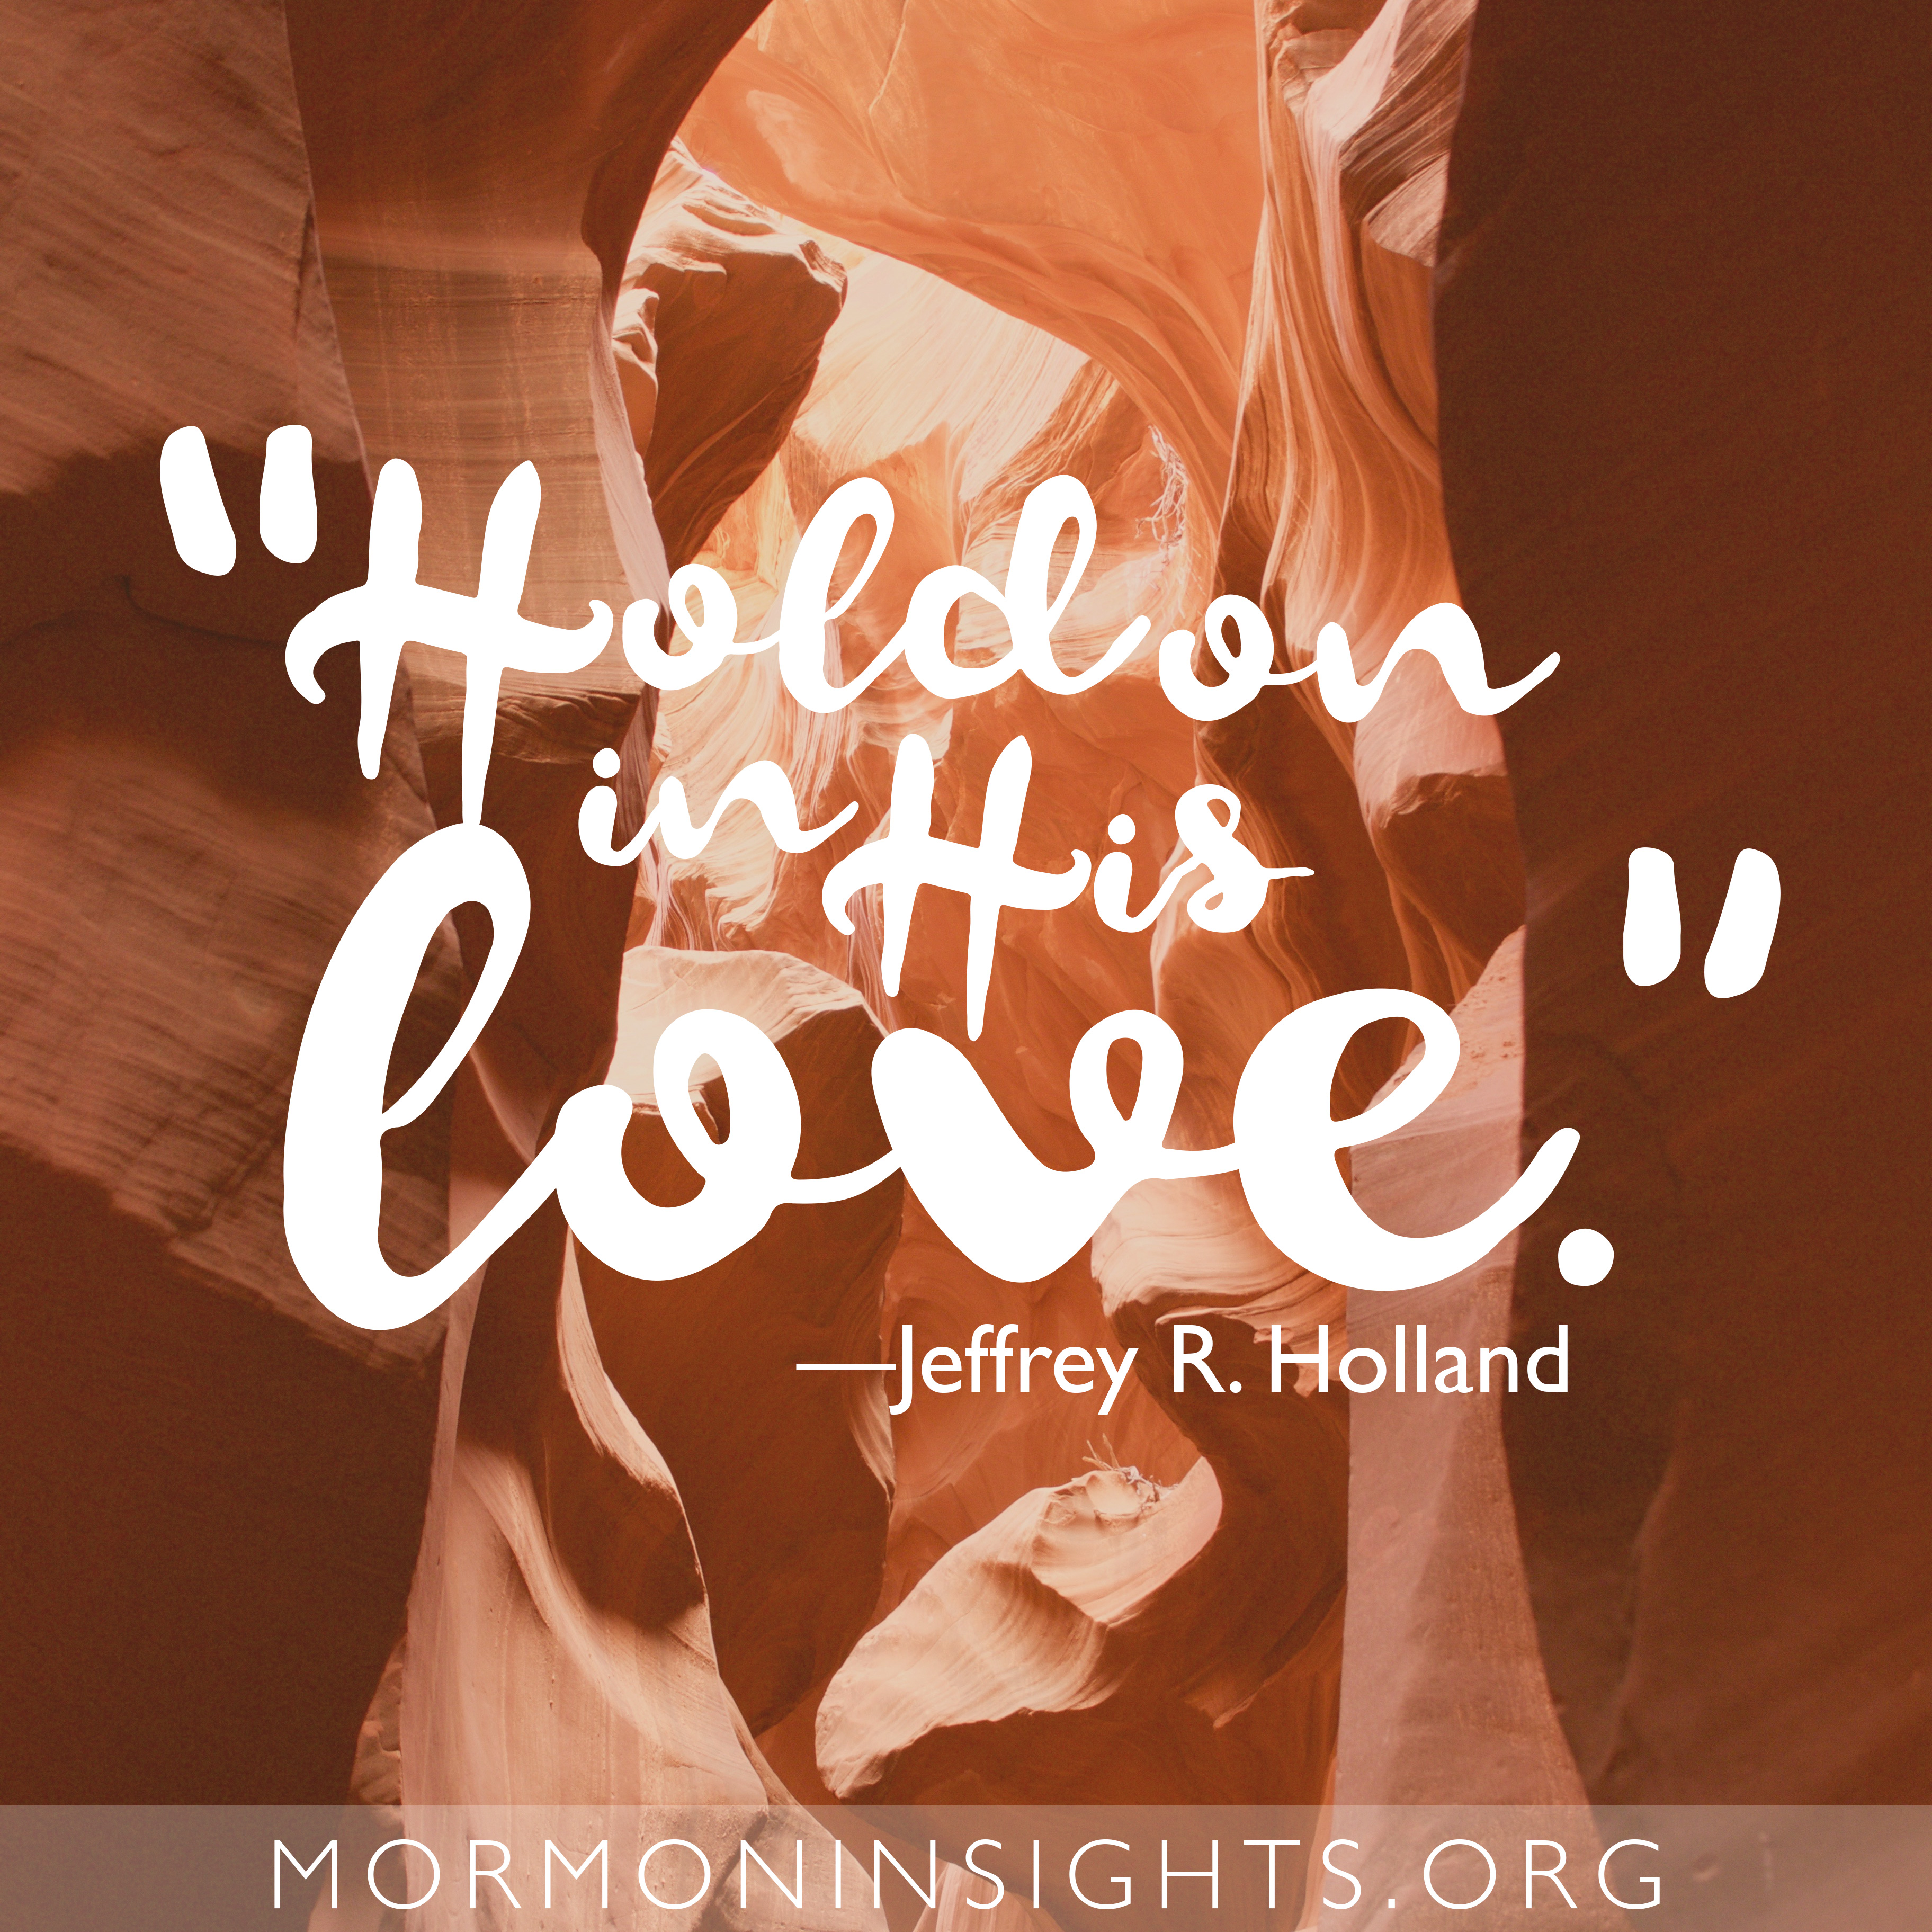 "Hold on in His love." -Jeffrey R. Holland